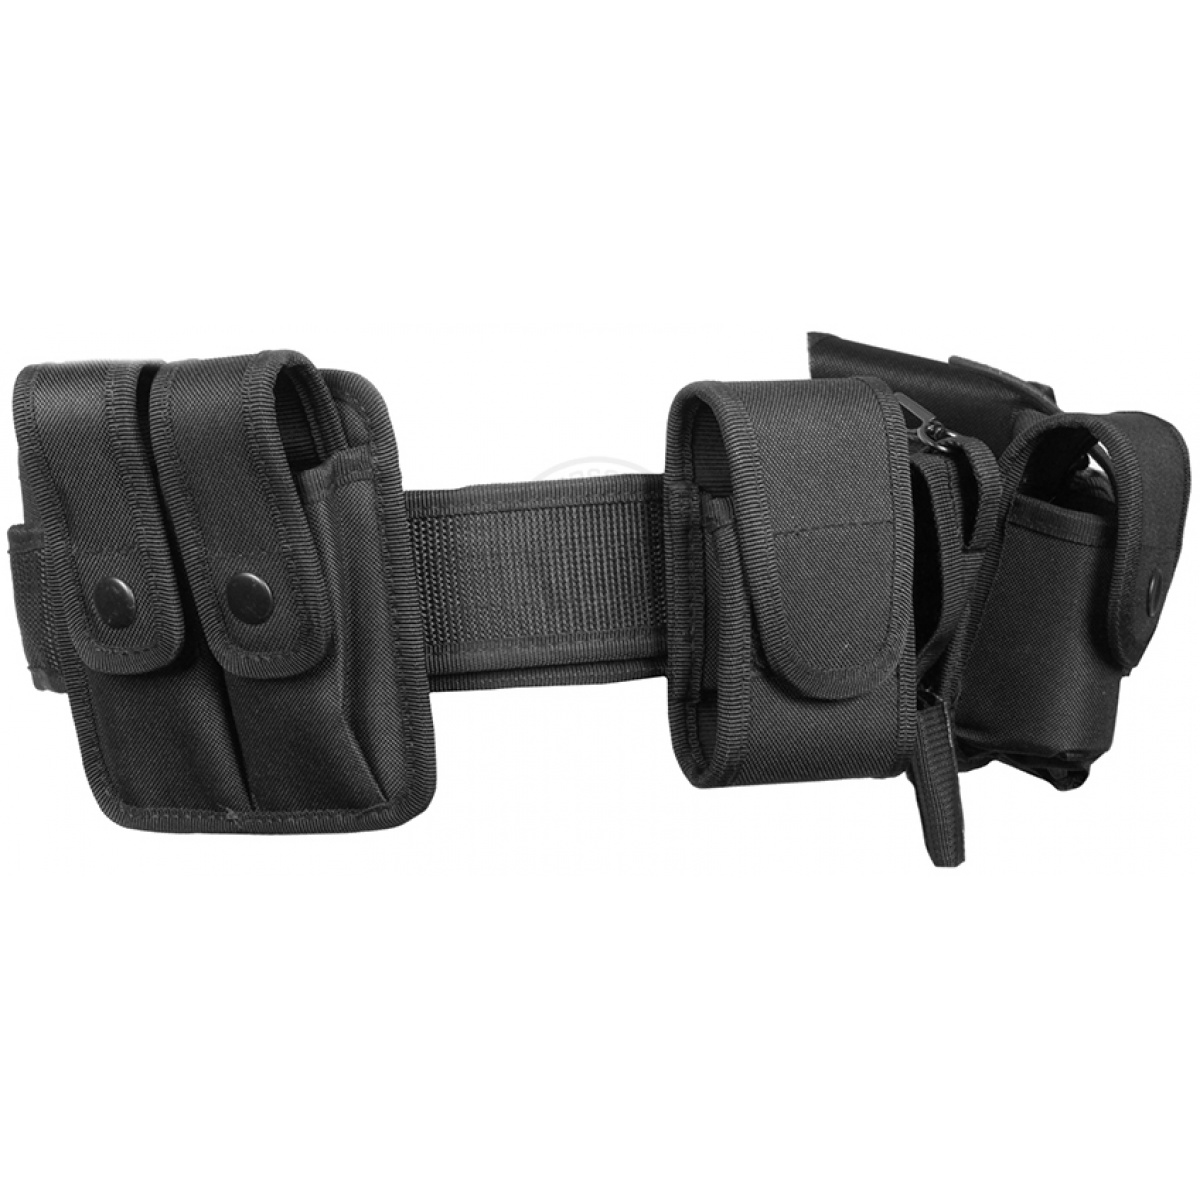 Police Utility Belt With Pouches Accessories Security Officer Law Enforcement 